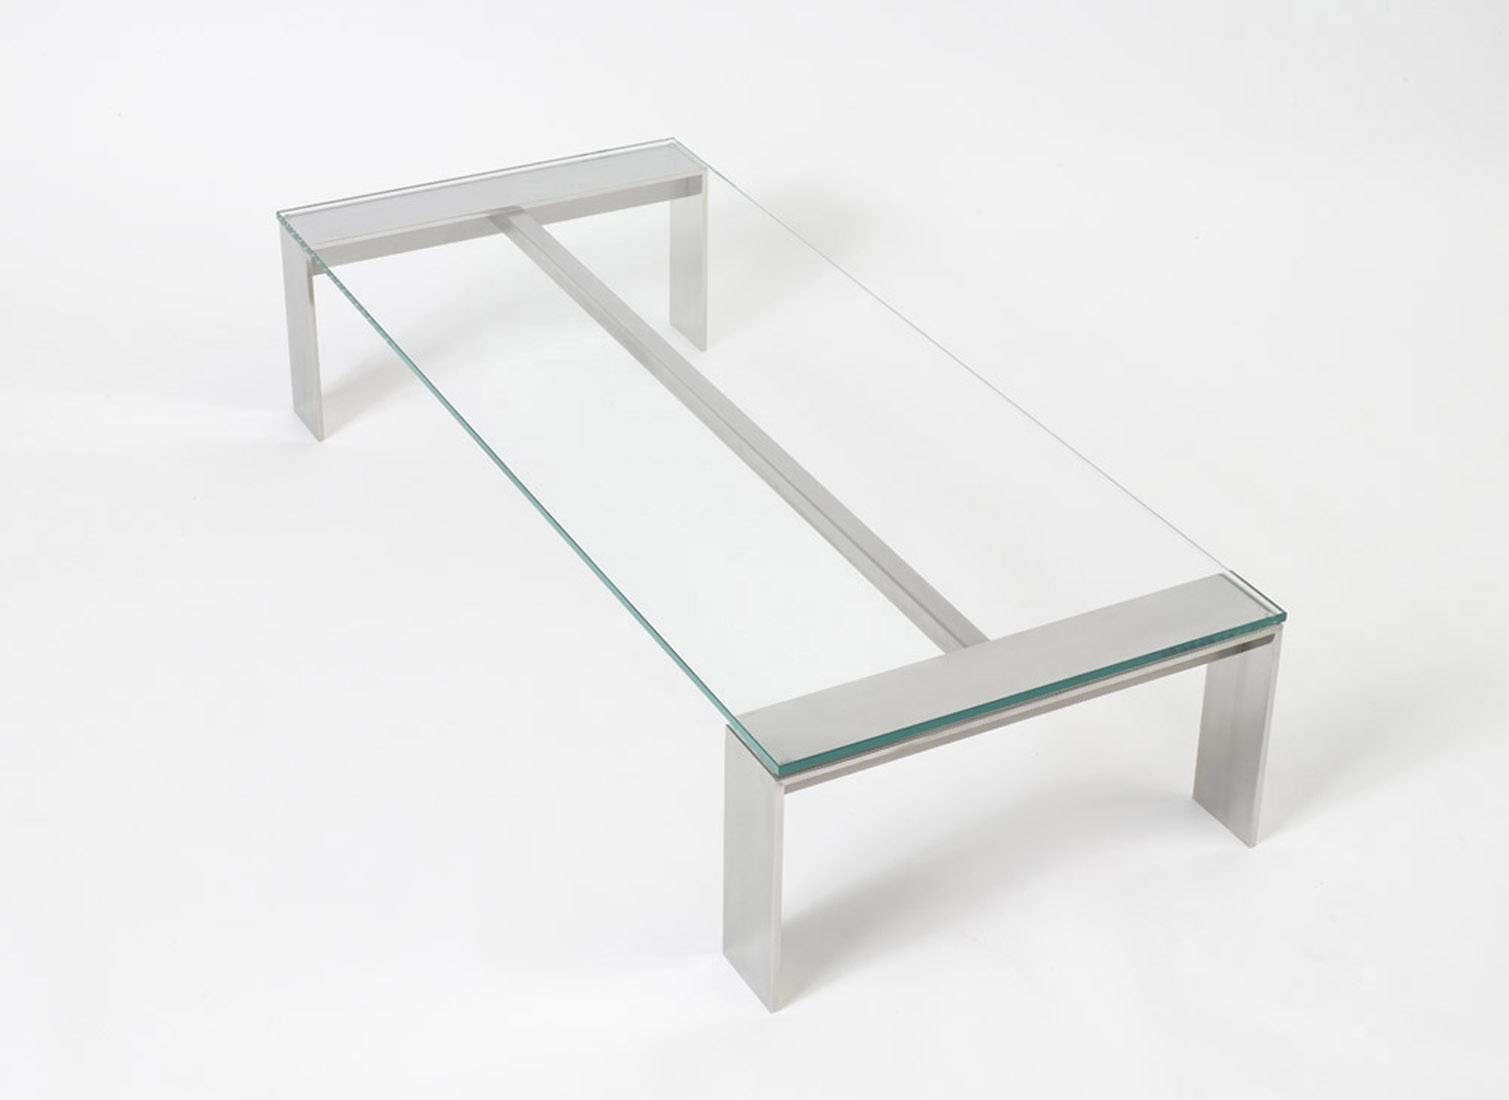 Bridge Coffee Table Stainless Steel, Mirror Polished Finish with Clear Glass In Excellent Condition For Sale In Brooklyn, NY